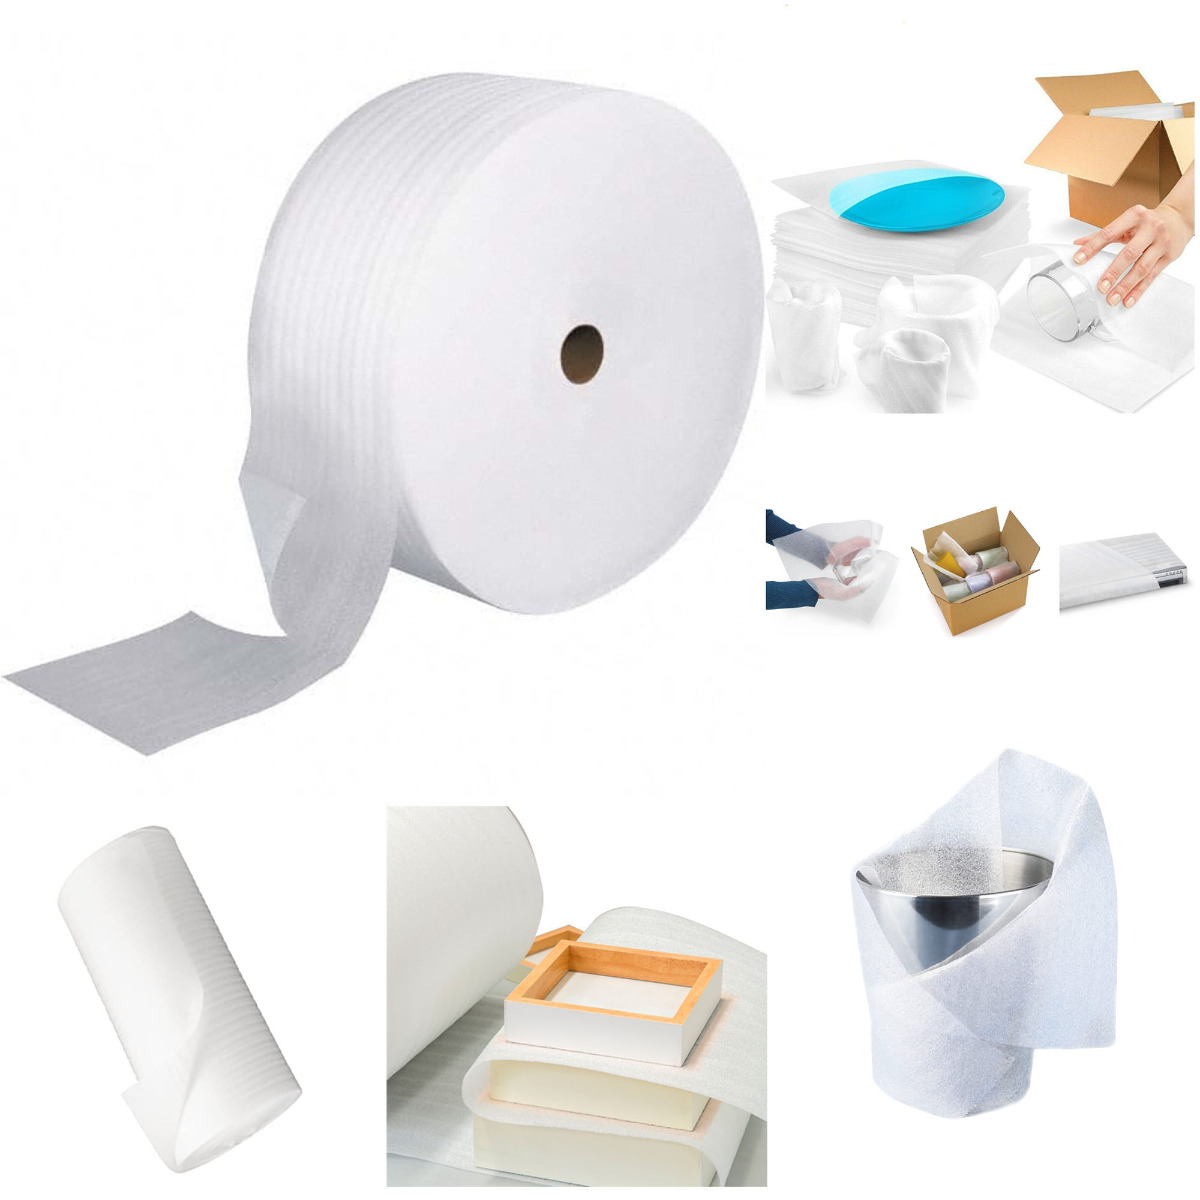 HIGH QUALITY BRAND NEW 500mm Roll Of JIFFY FOAM WRAP Underlay Packing 